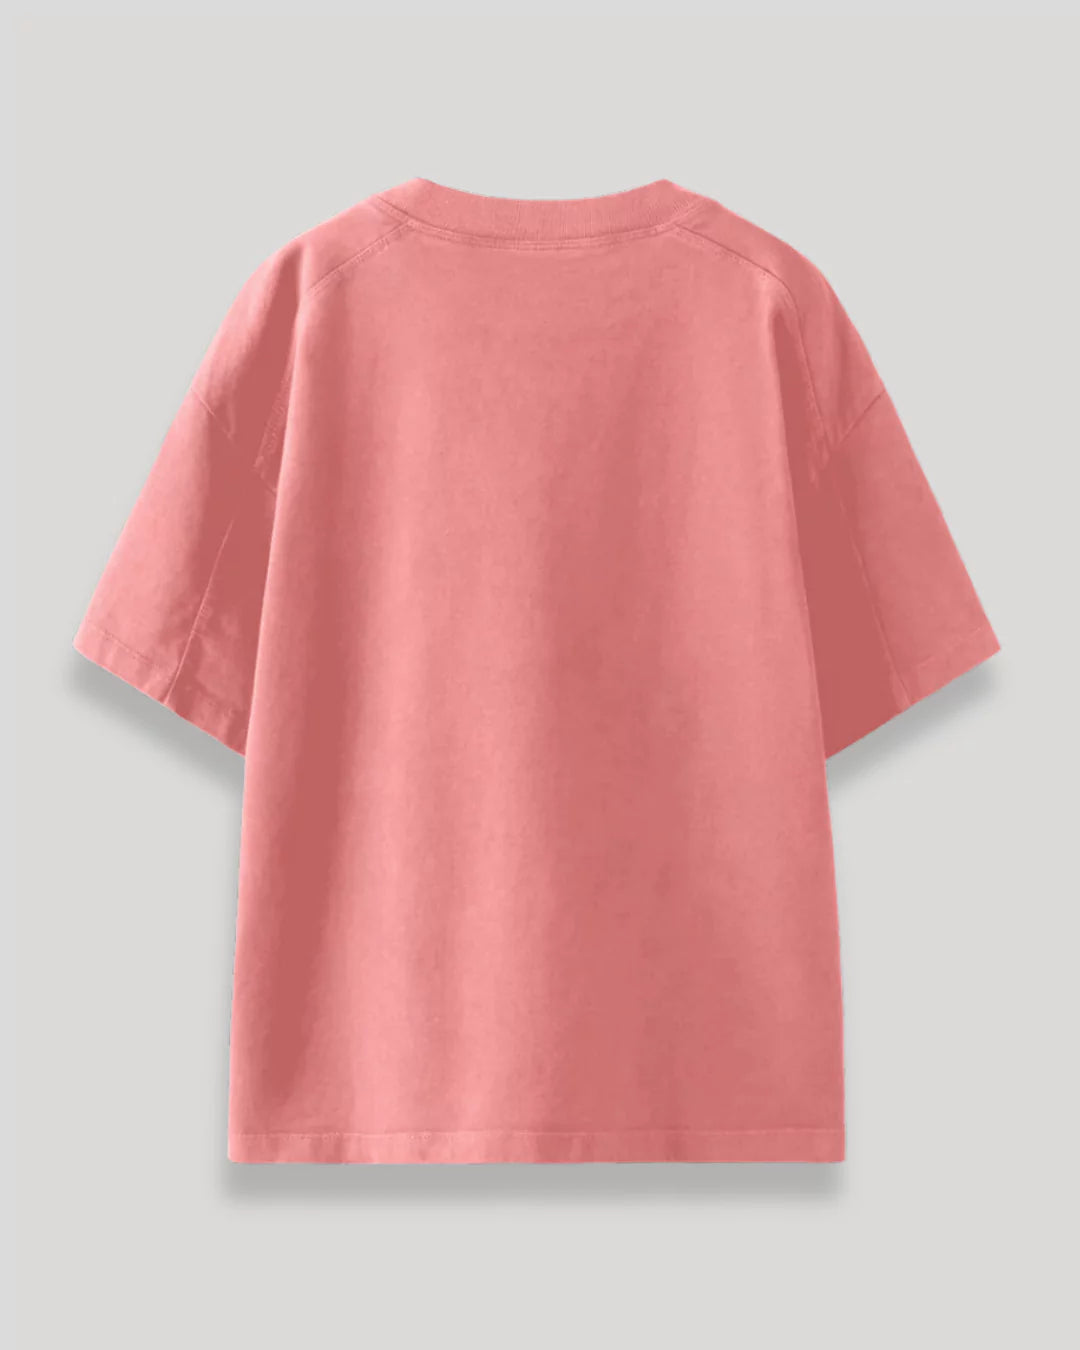 Over It Pink Oversized T-Shirt